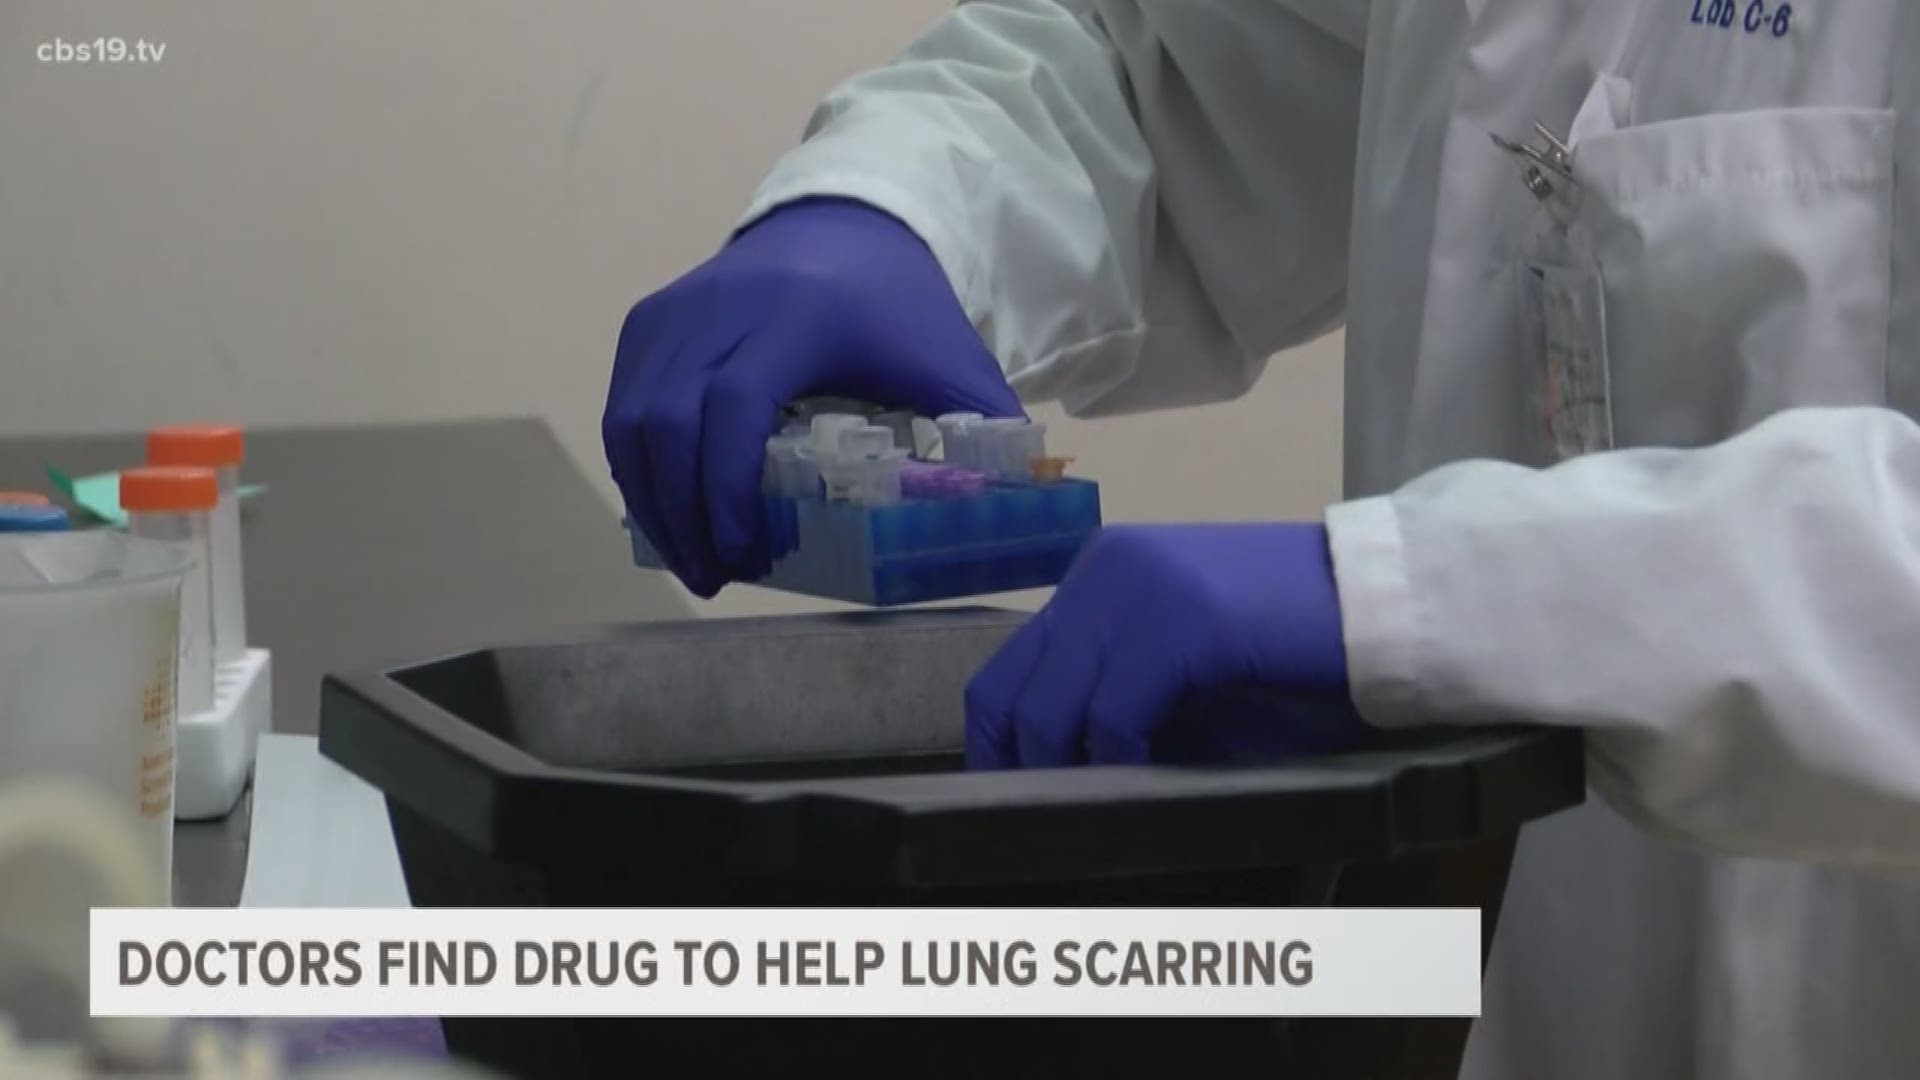 Two doctors with UT Health Science Center have discovered a drug to not only prevent lung scarring, but also reverse it.